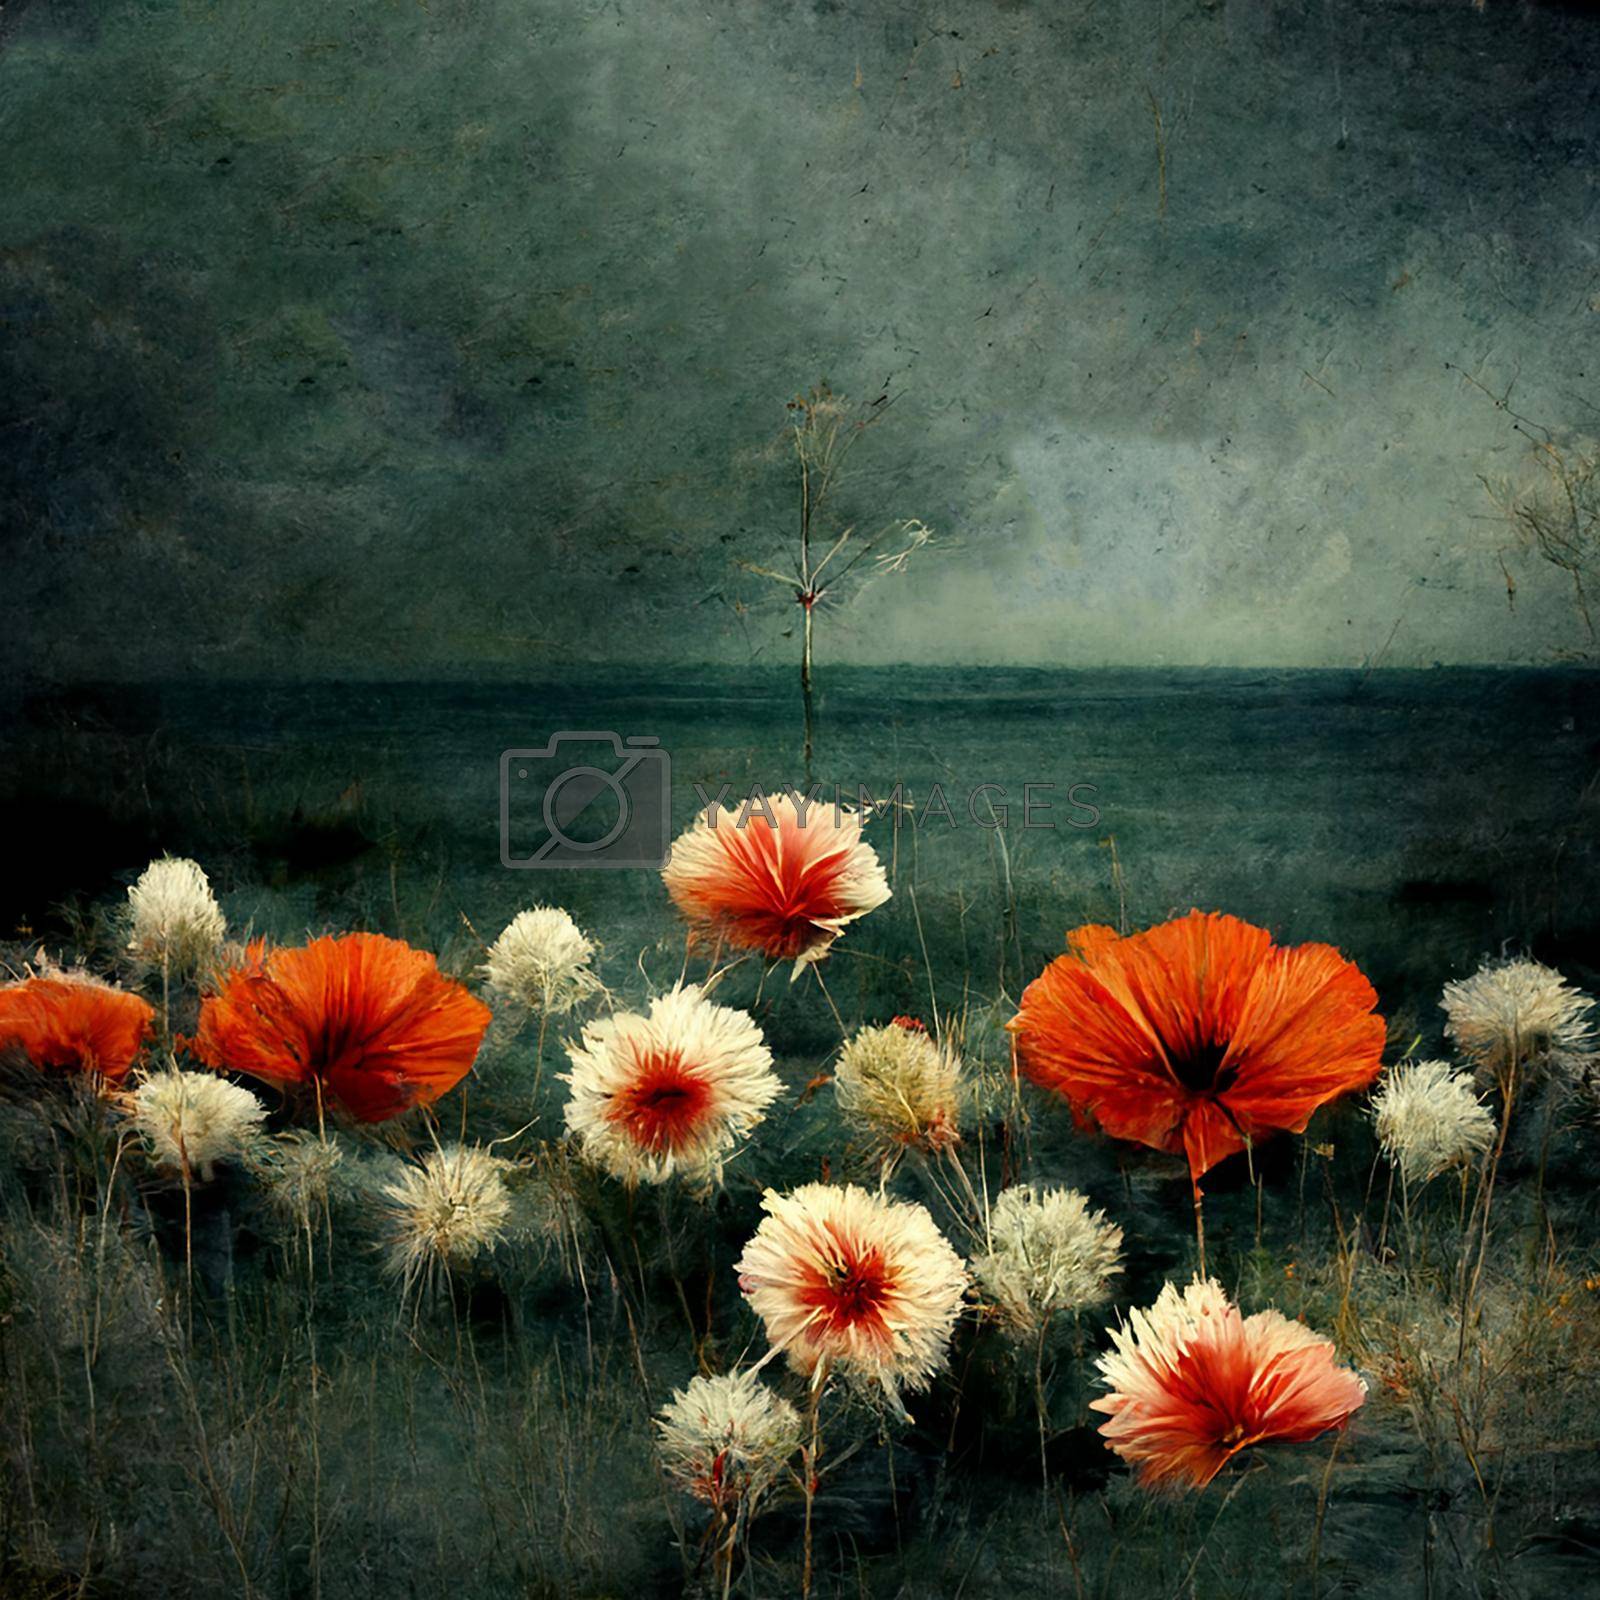 Royalty free image of Artistic illustration of flowers waving in the wind in a dark setting by 	JacksonStock